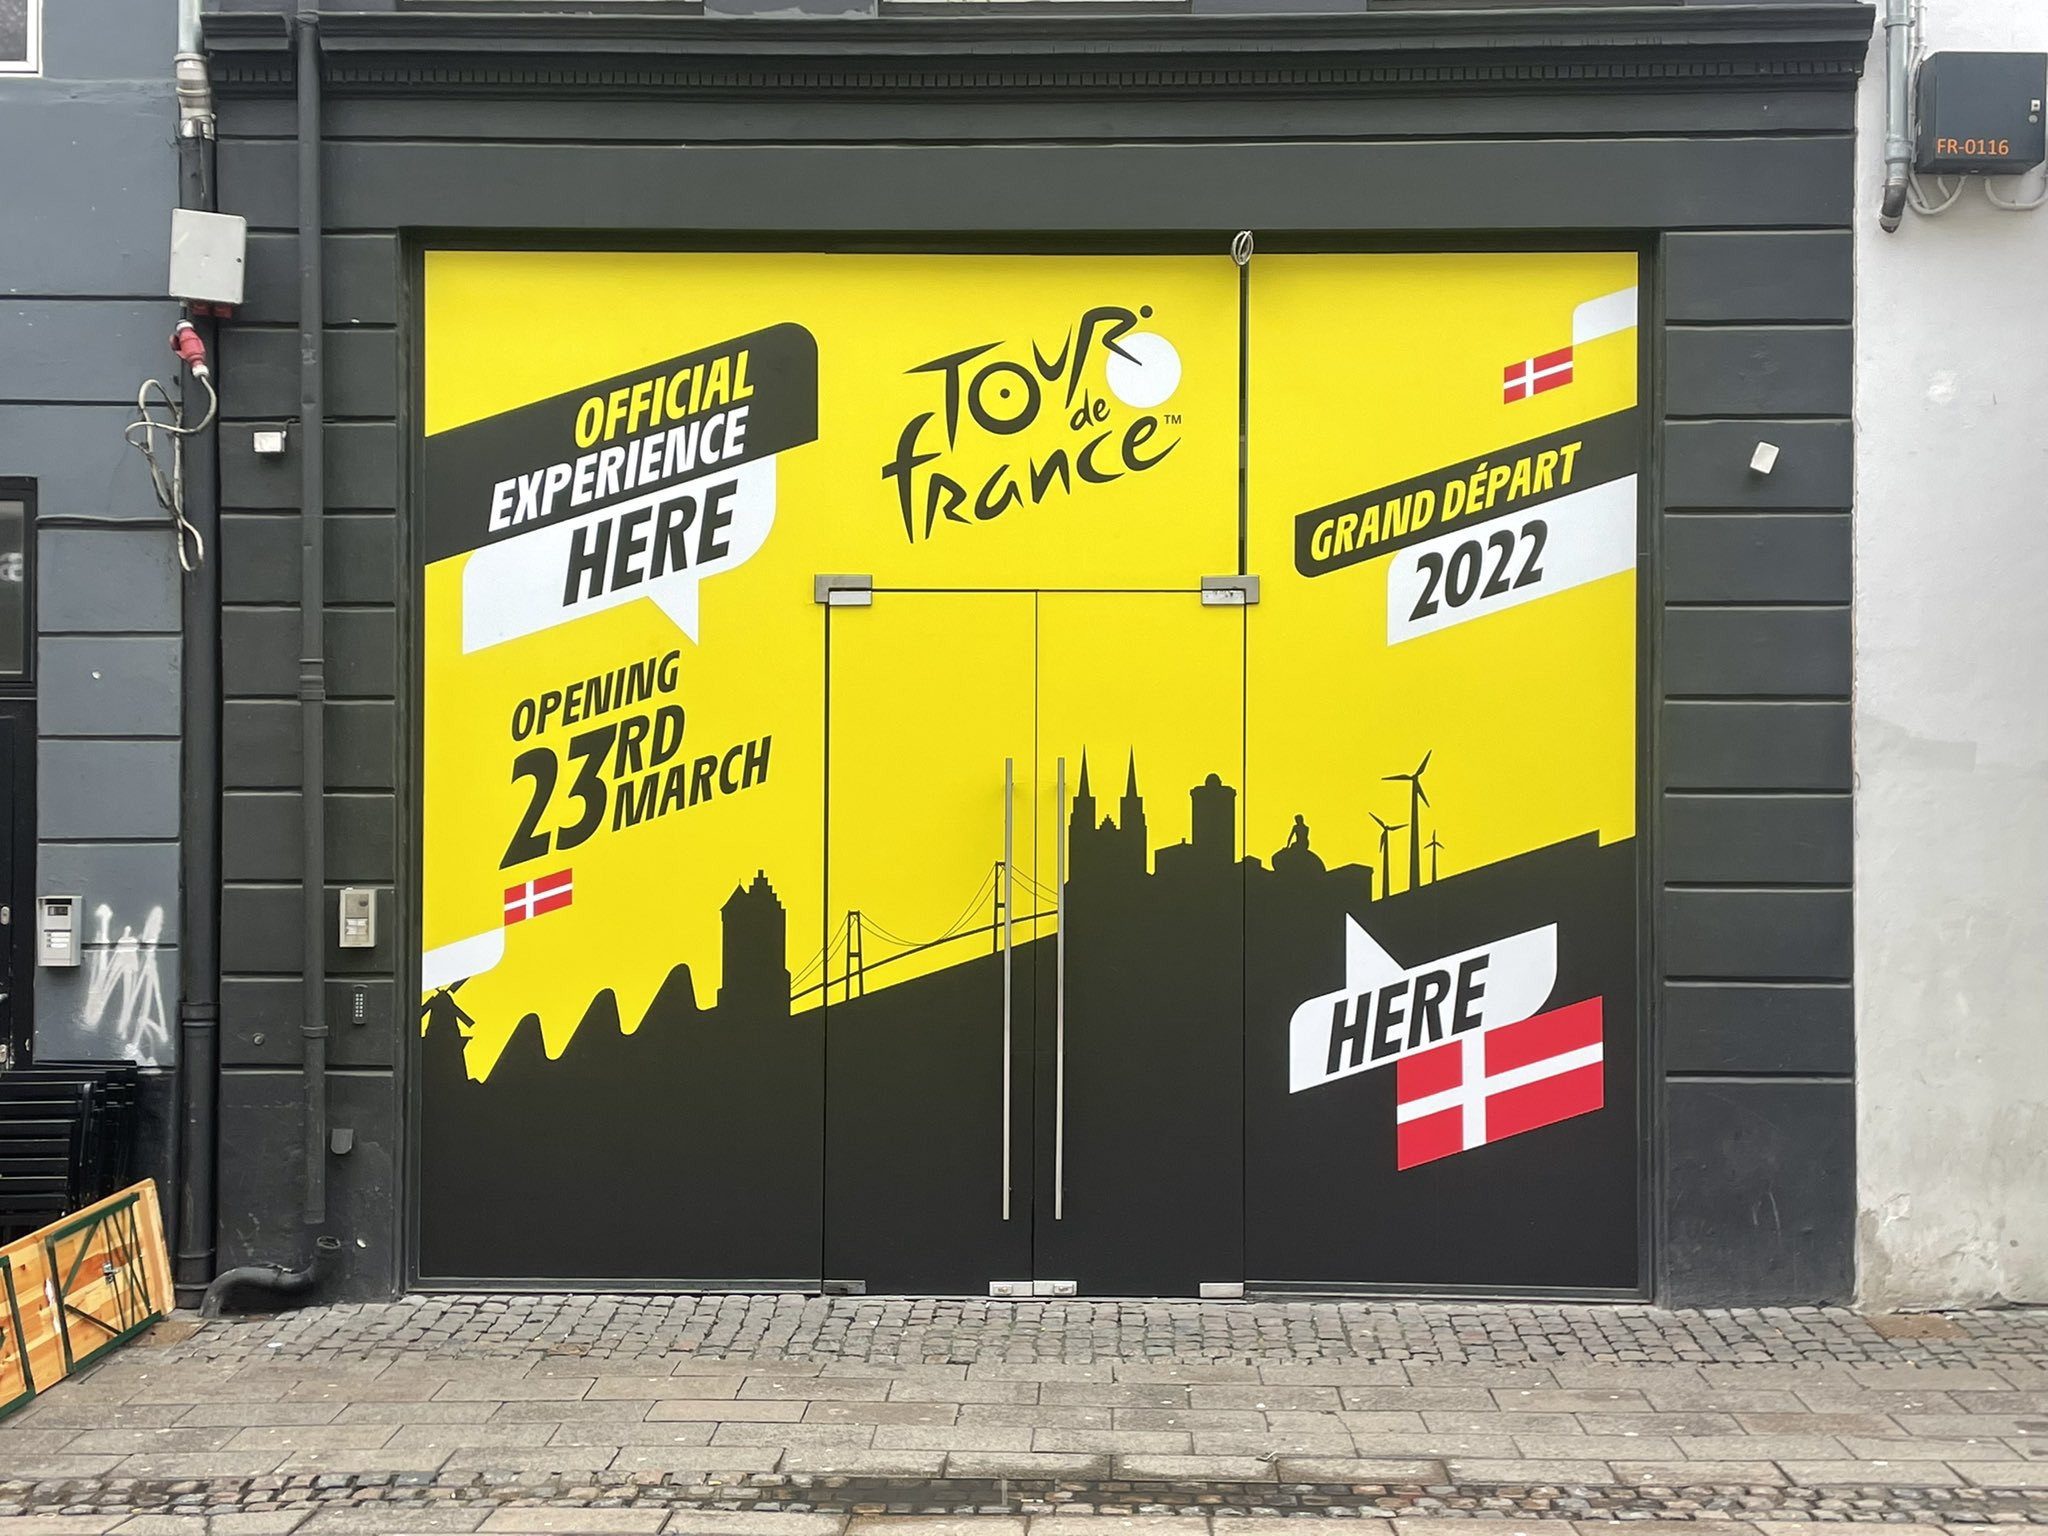 More than 85 activities are currently planned in the build-up to the Tour de France Grand Départ in Copenhagen on July 1 ©Twitter/letourdk